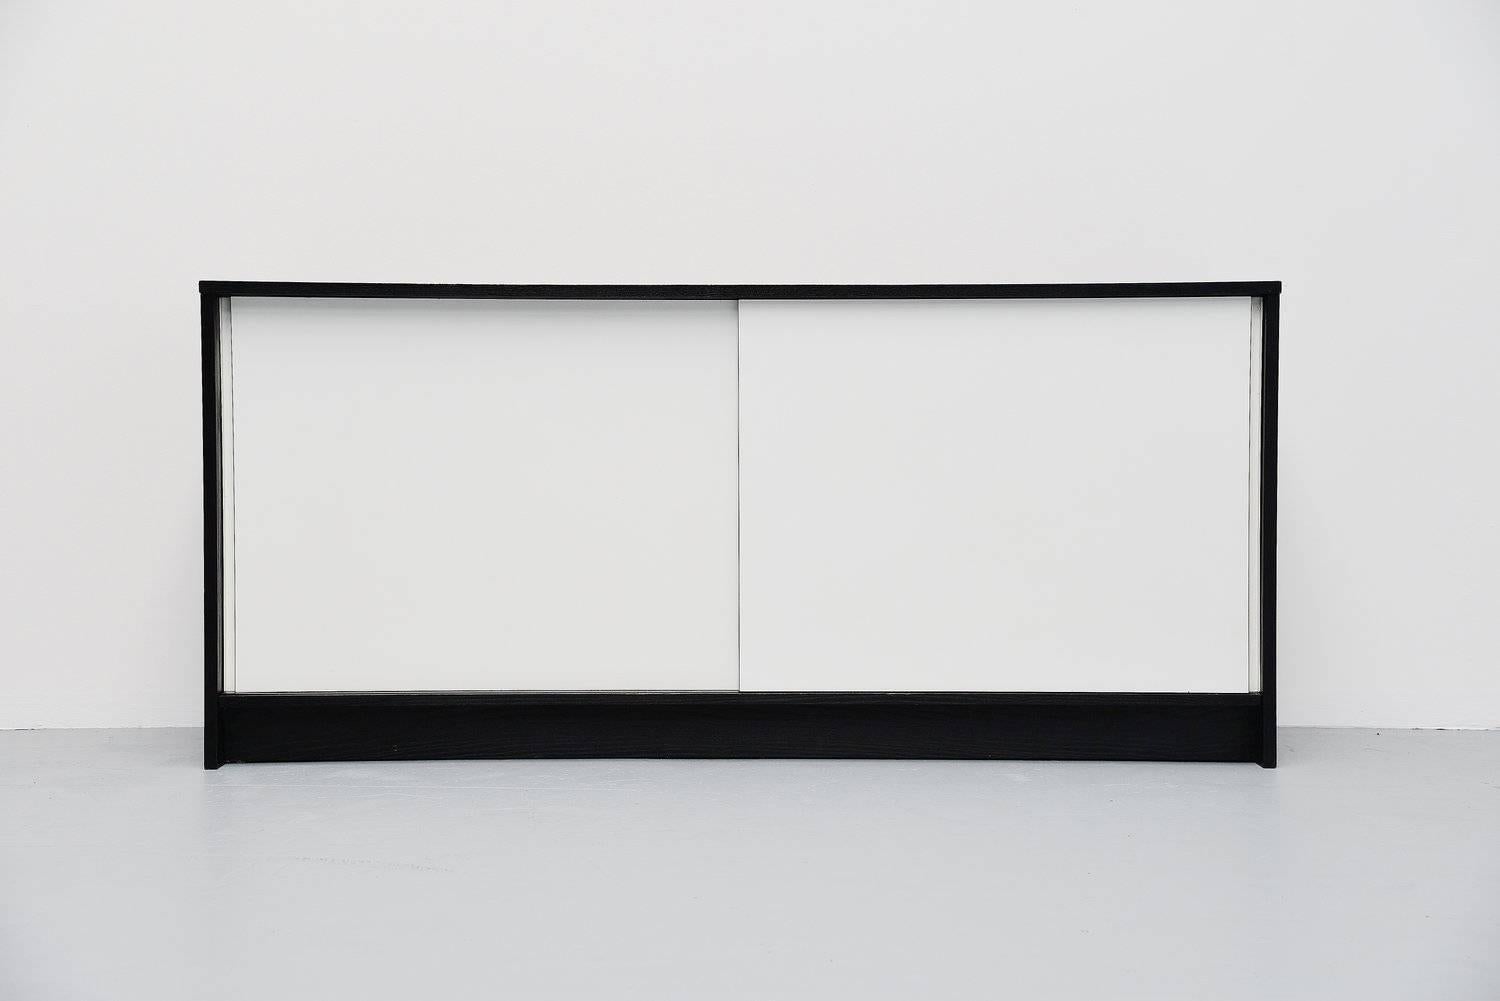 Very nice credenza designed by Martin Visser for 't Spectrum, 1965. This credenza is model KW90 which is a bit higher than KW60. This has a black ebonized ash wooden casing and two white laminated sliding doors with shelves and a drawer behind. The